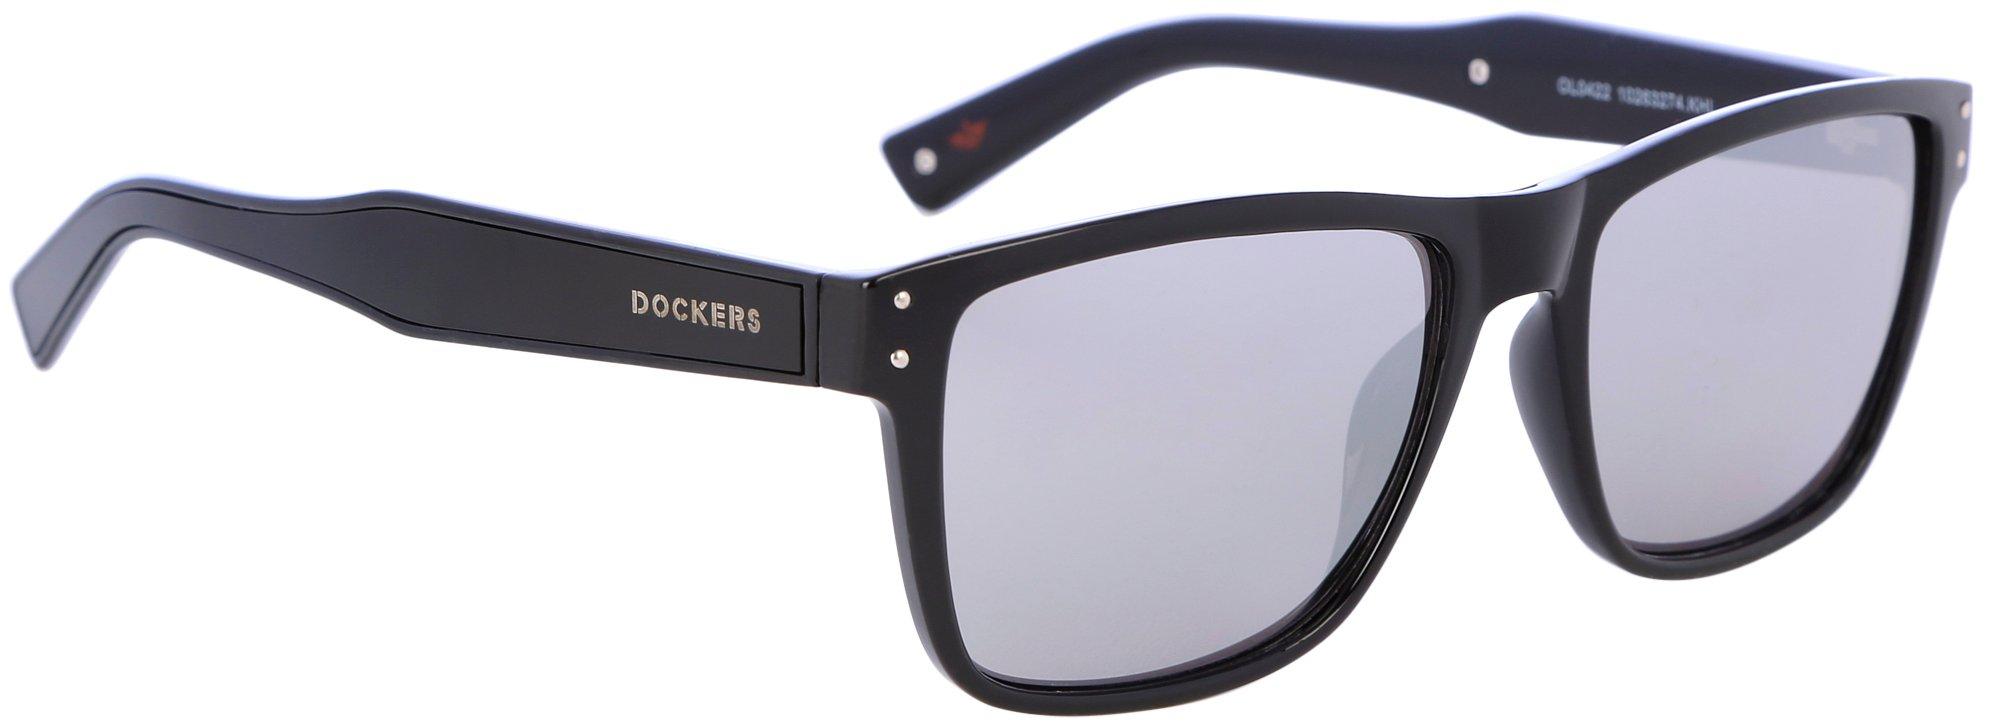 Mens Solid Mirror Tinted Sunglasses